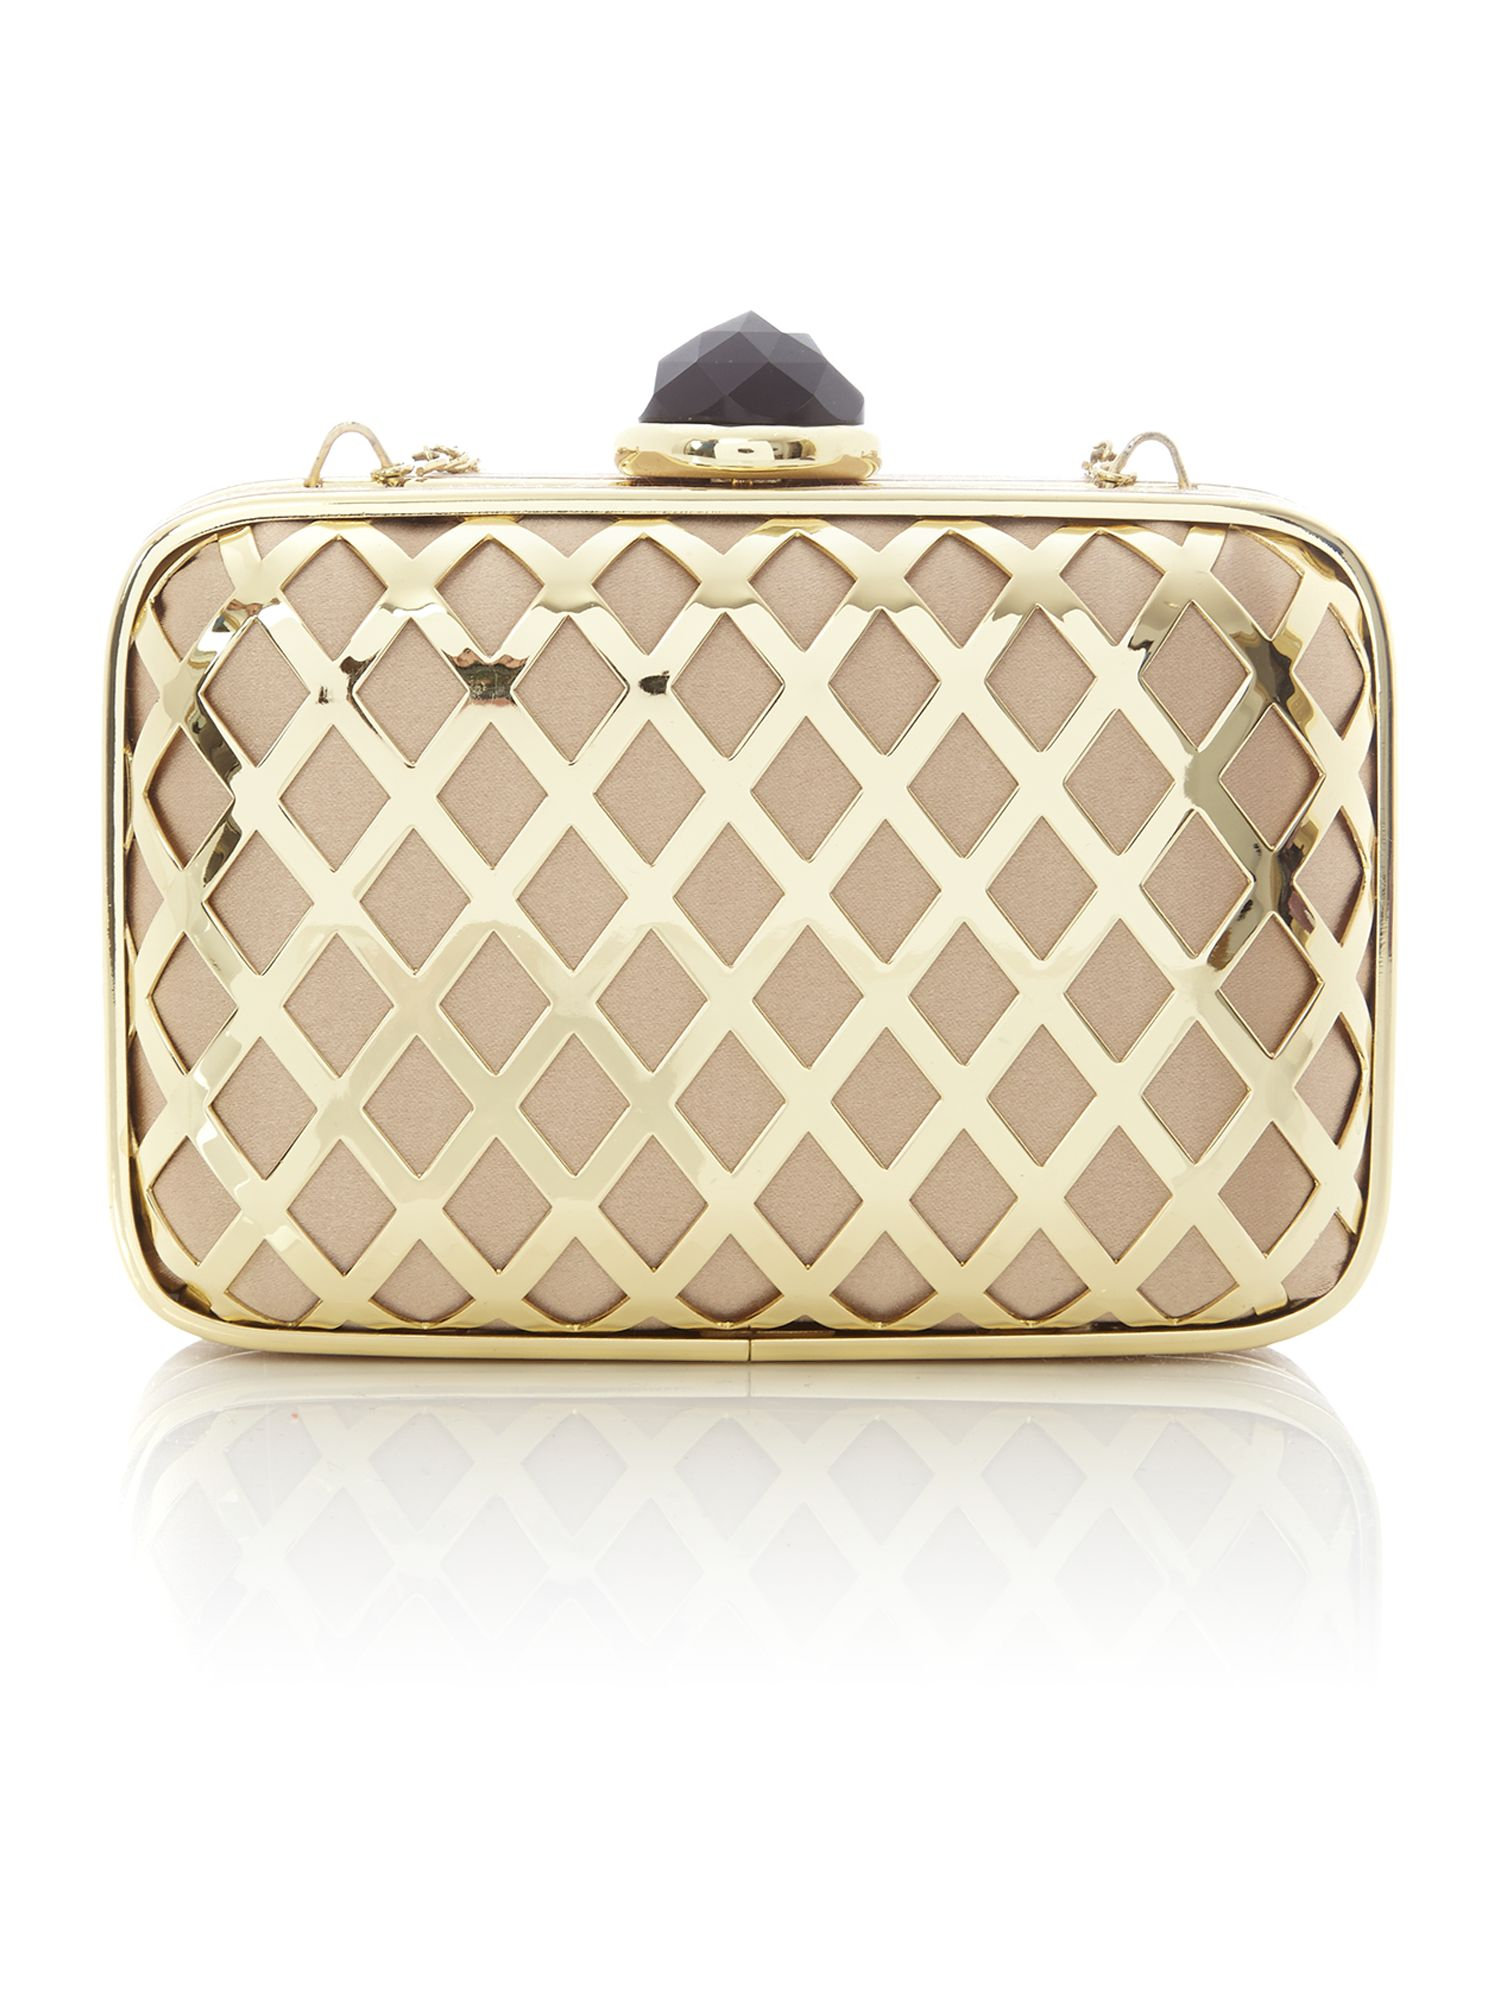 Lyst - Love Moschino Black and Gold Evening Clutch Bag in Metallic